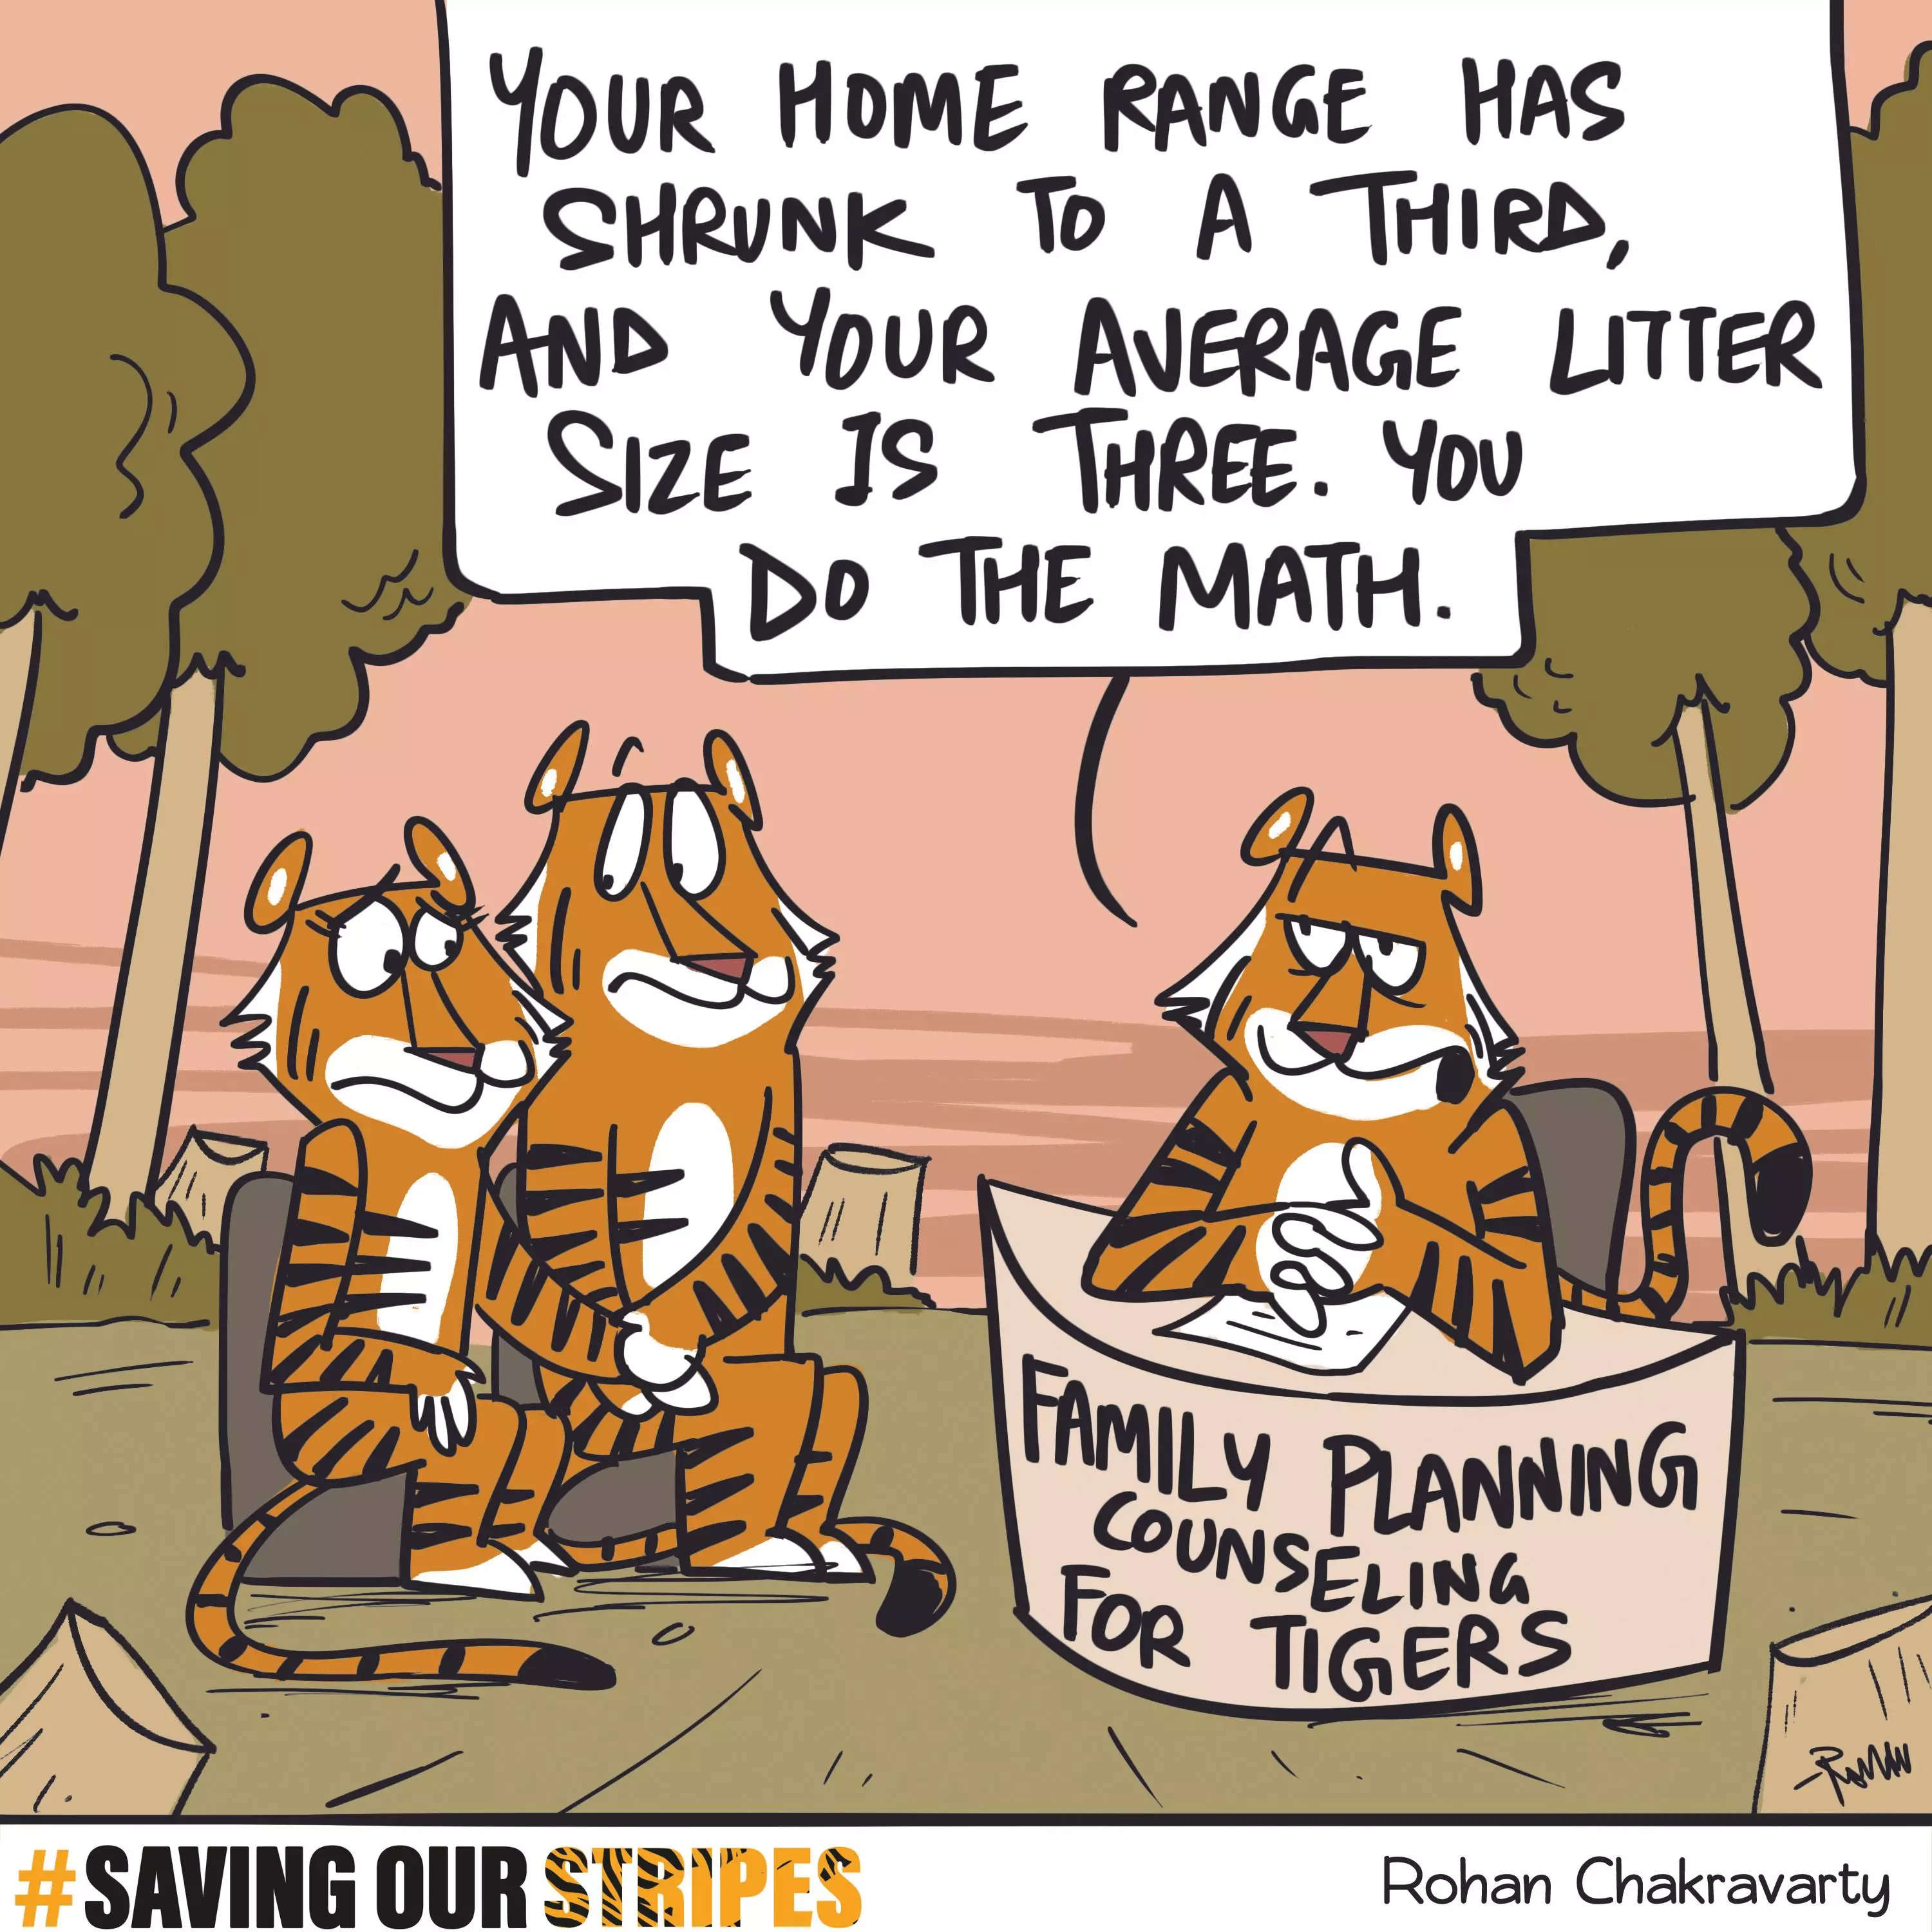 We may be big cats, but we still need a little help with the numbers! Our home range has shrunk and it's time for some tiger family planning to ensure a thriving population.